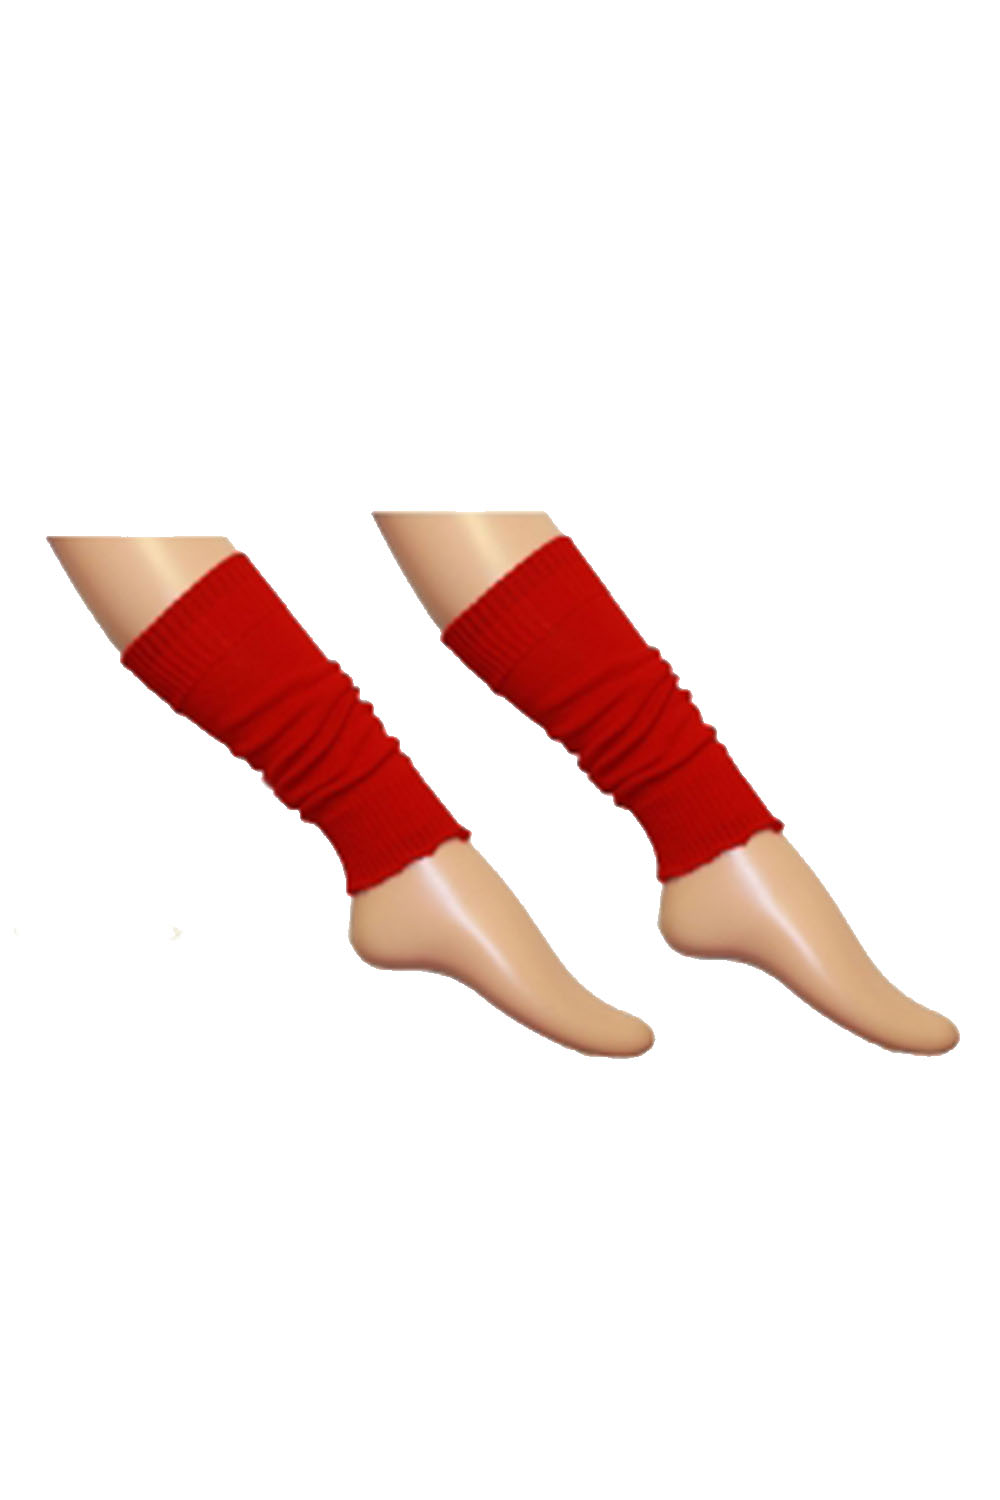 Crazy Chick Girls Red Legwarmers (Pack of 12)